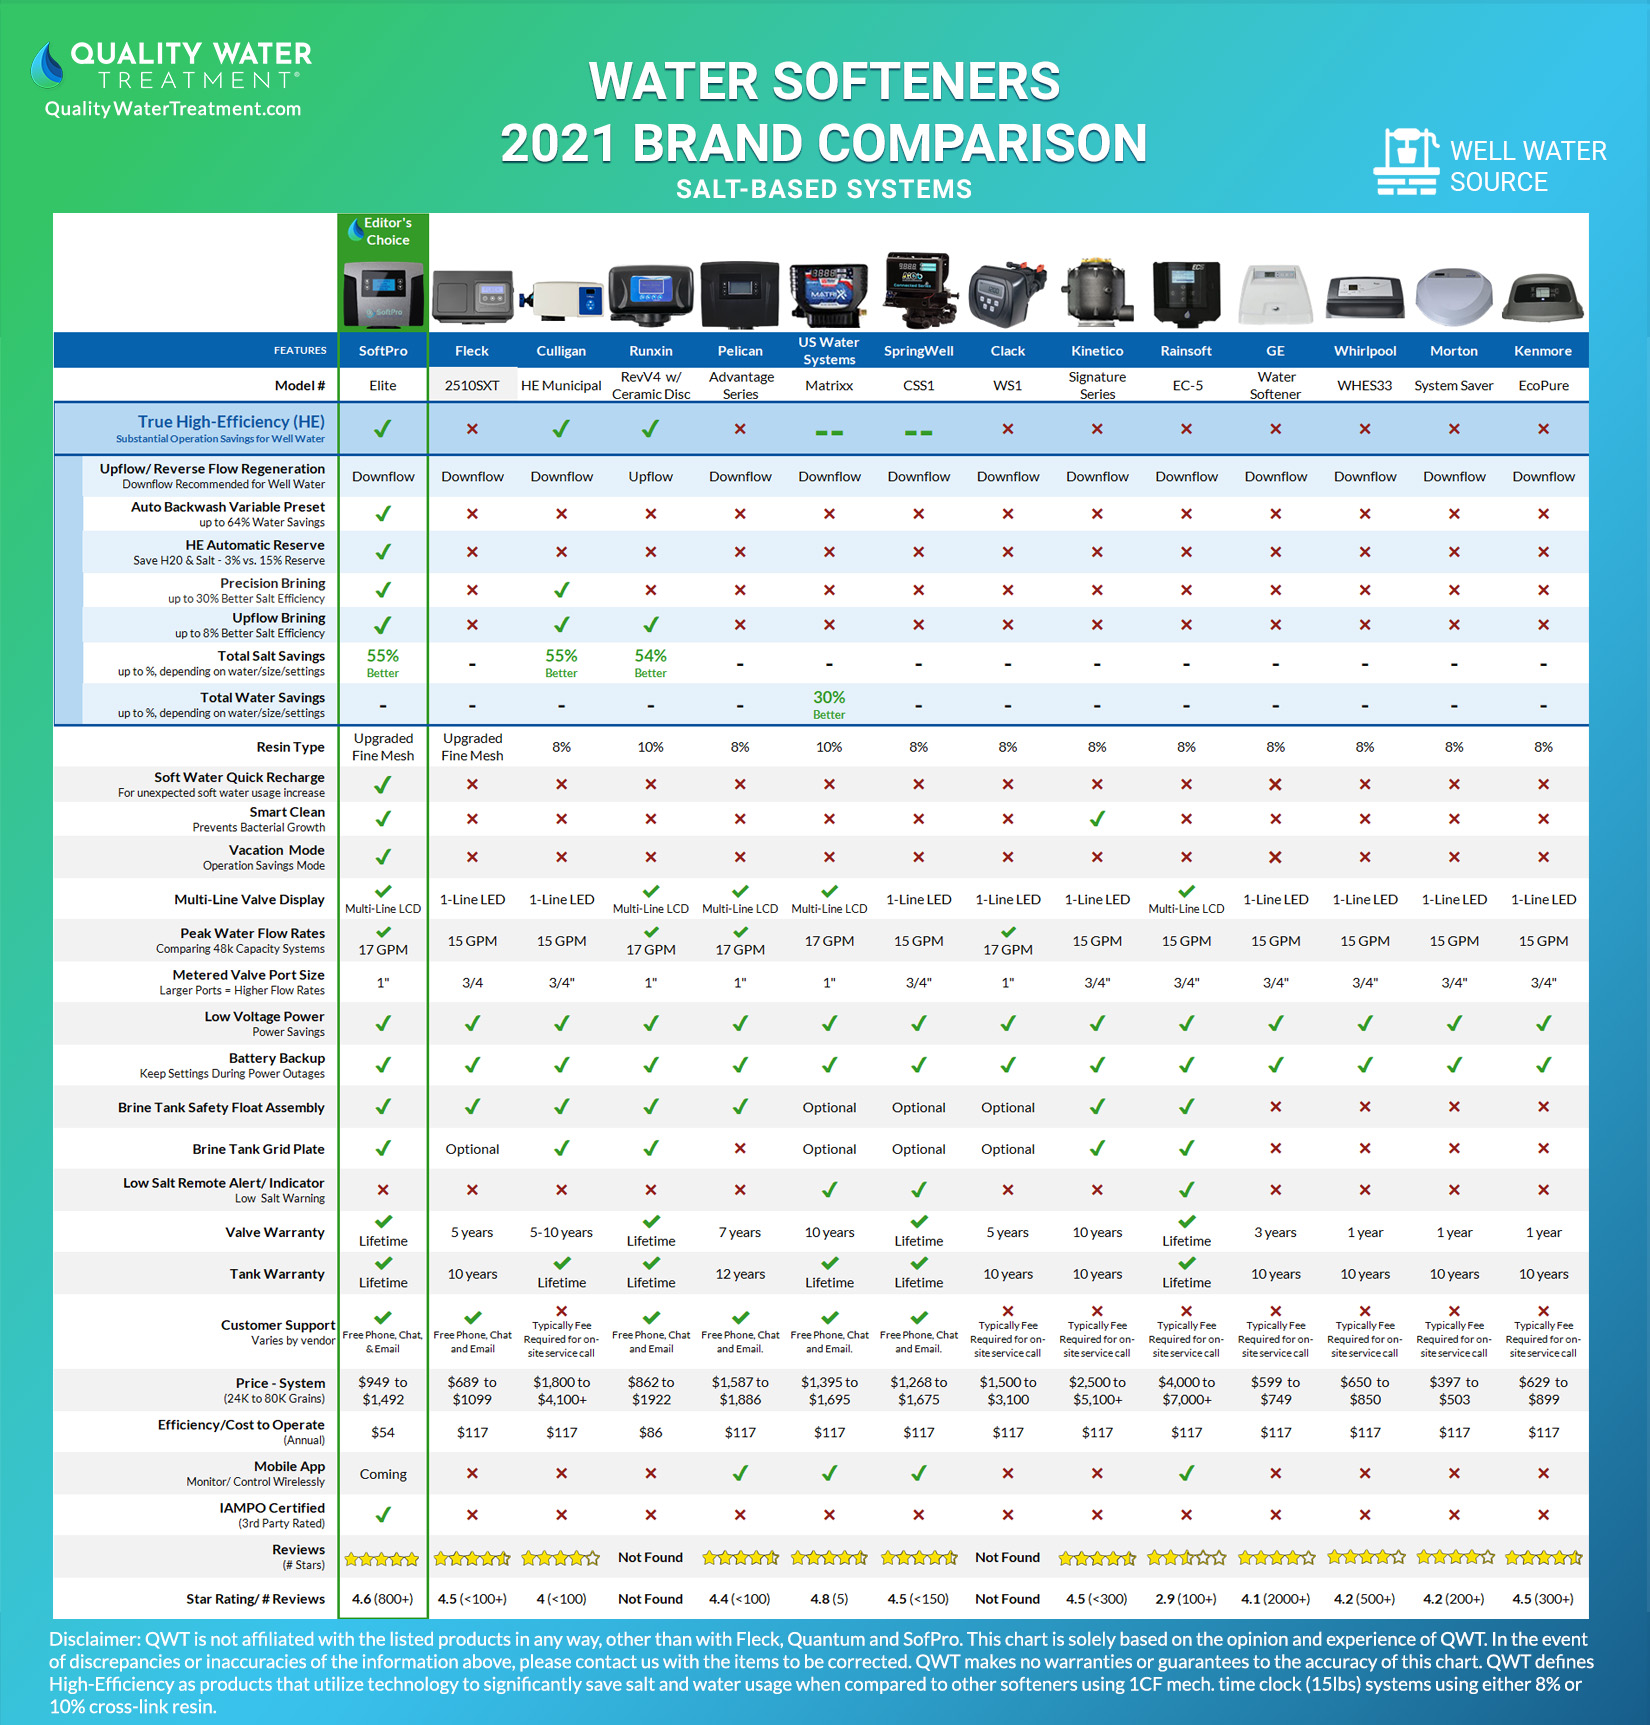 Well Water Report Water Softener Sizing Calculator & Water Score Reports